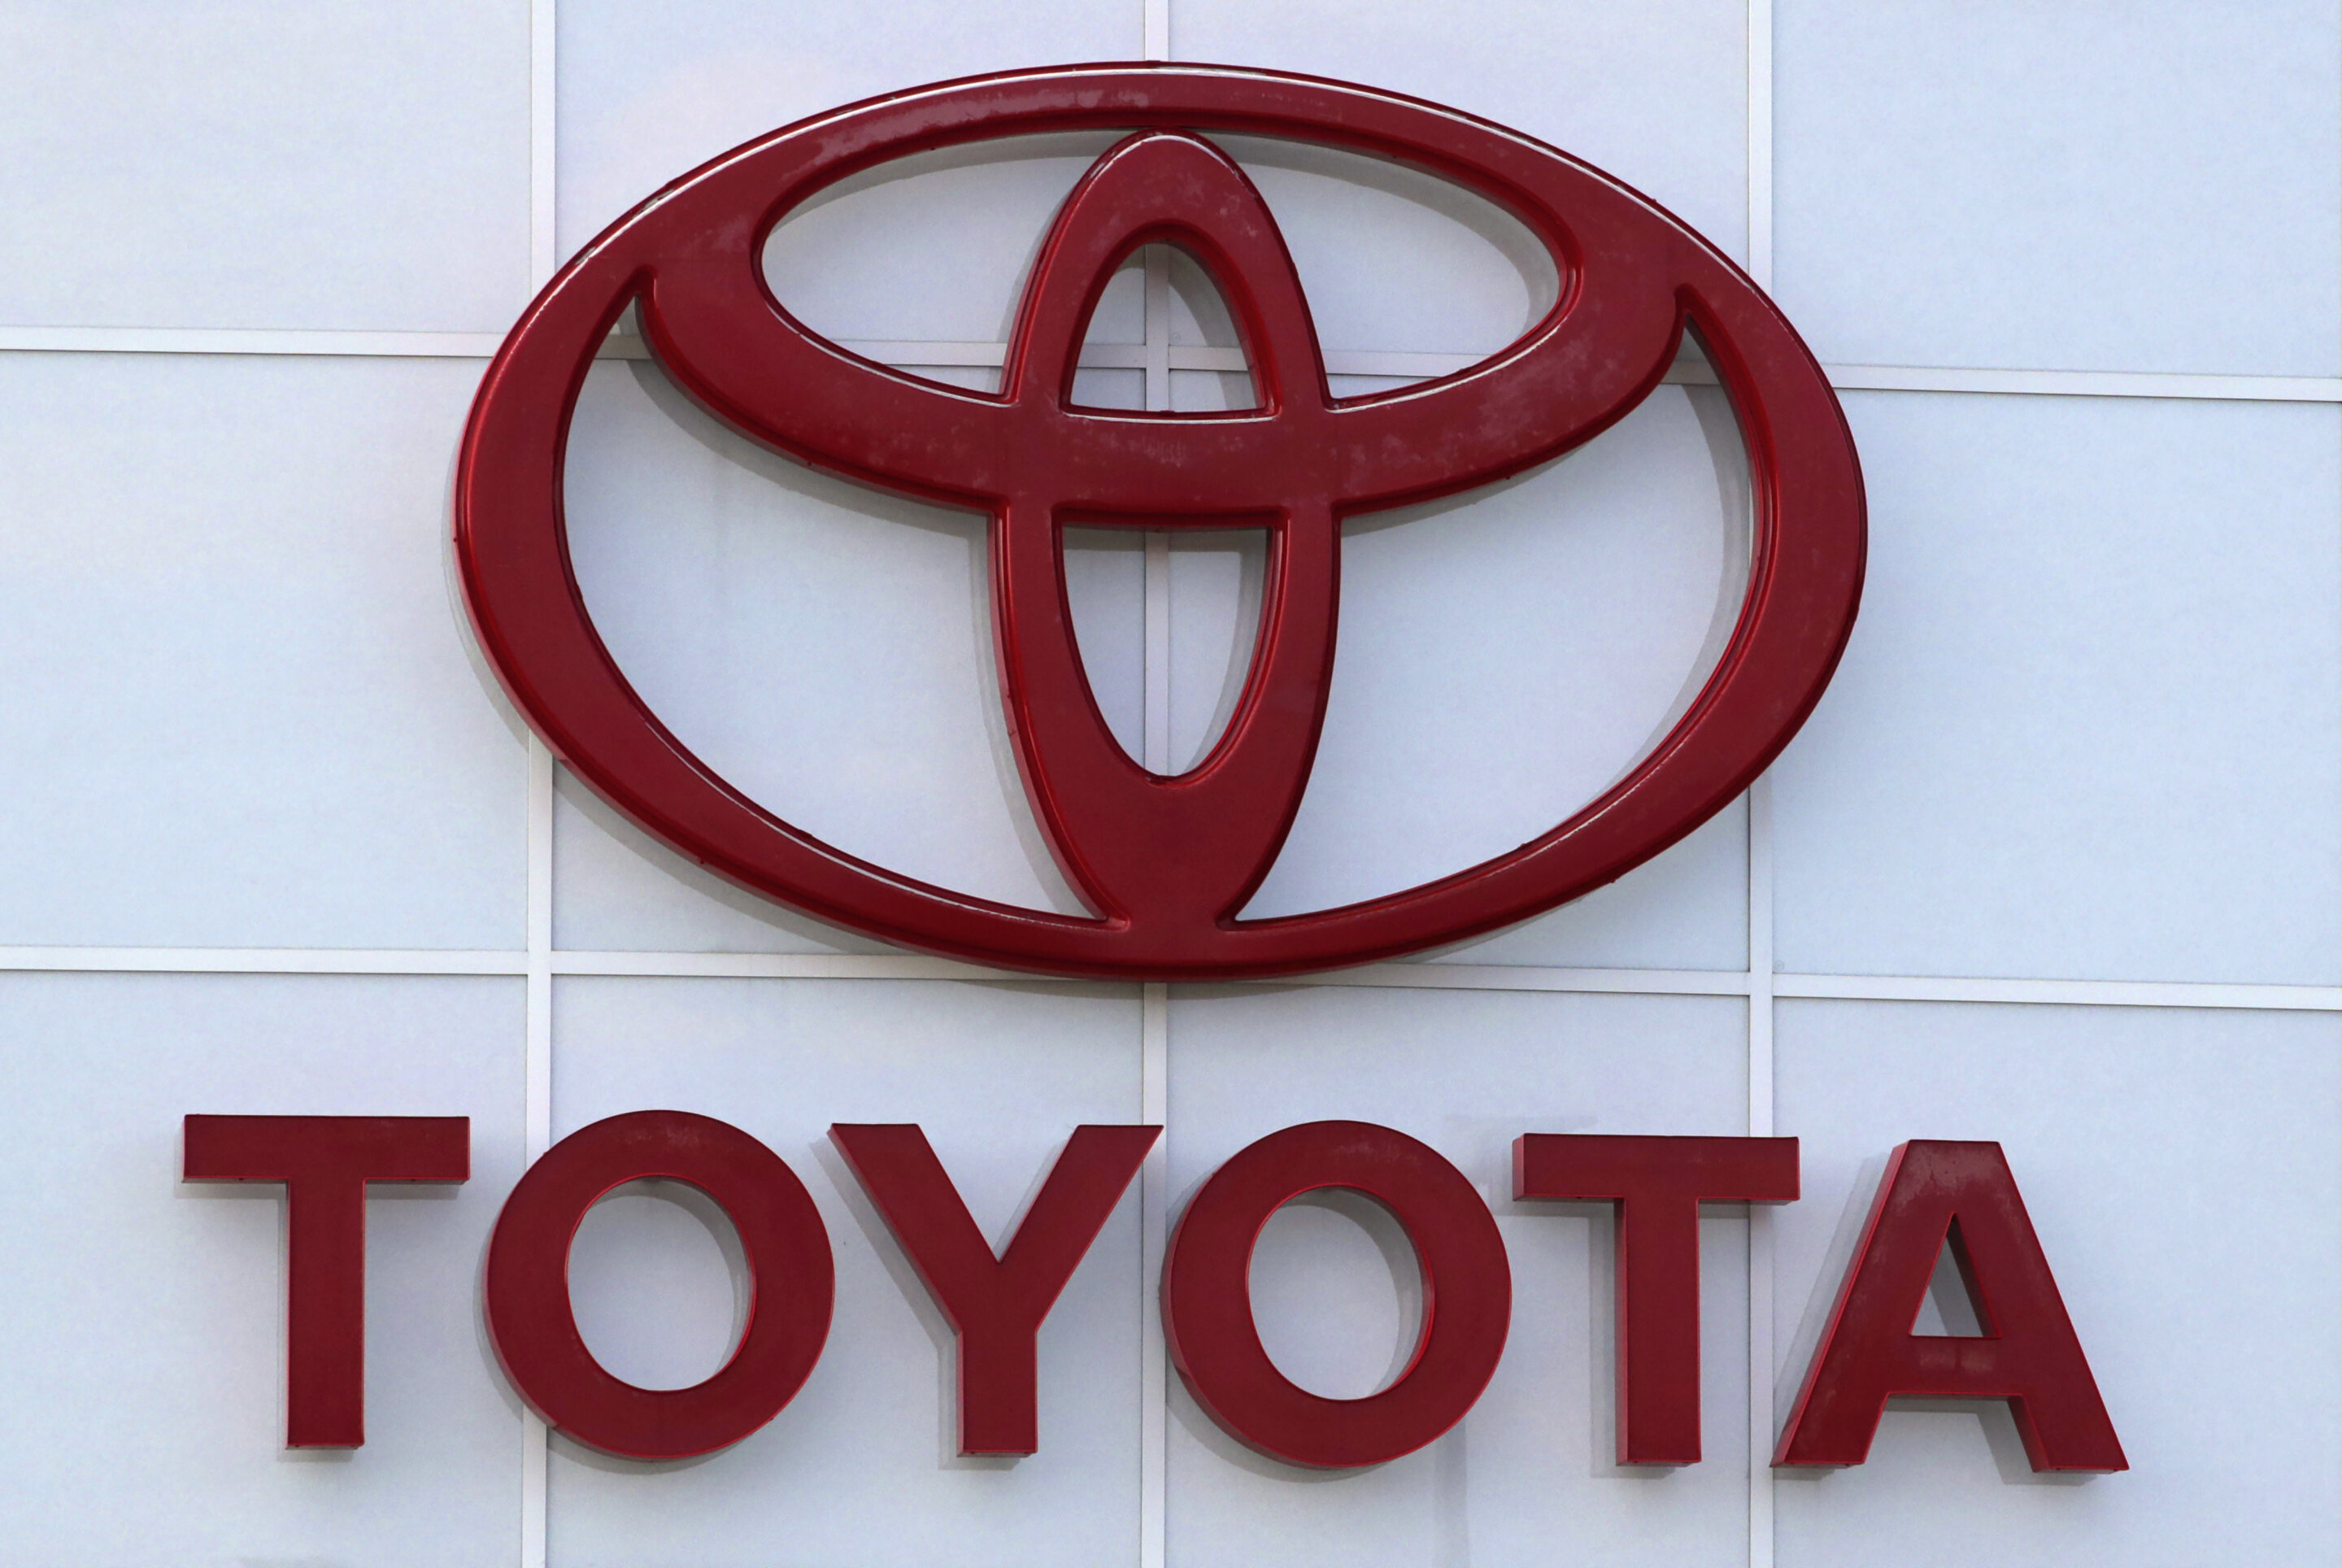 Toyota reports record profit amid pandemic, keeps forecasts